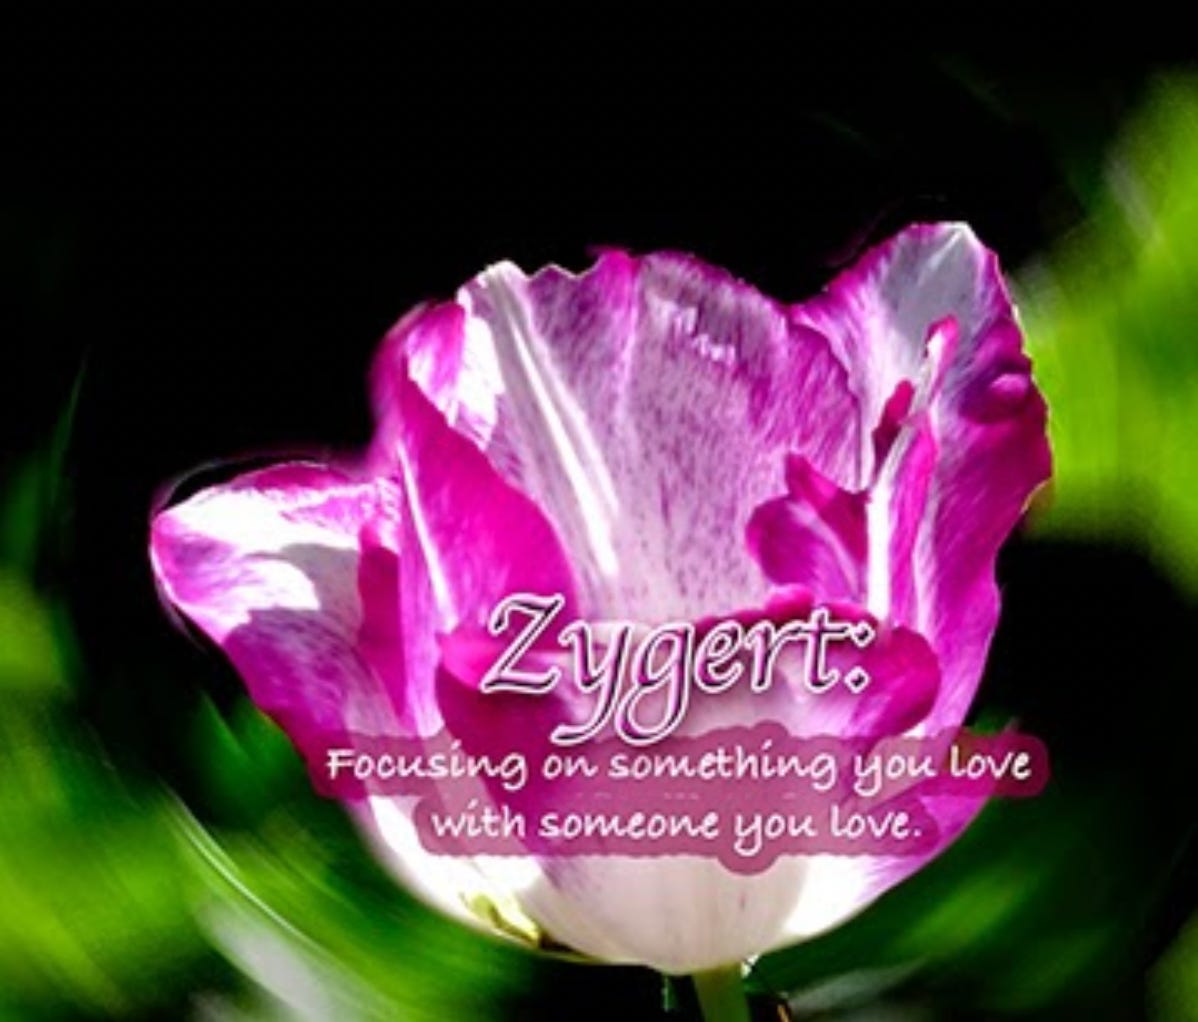 learning Zygert ... focusing on something you love with someone you love.